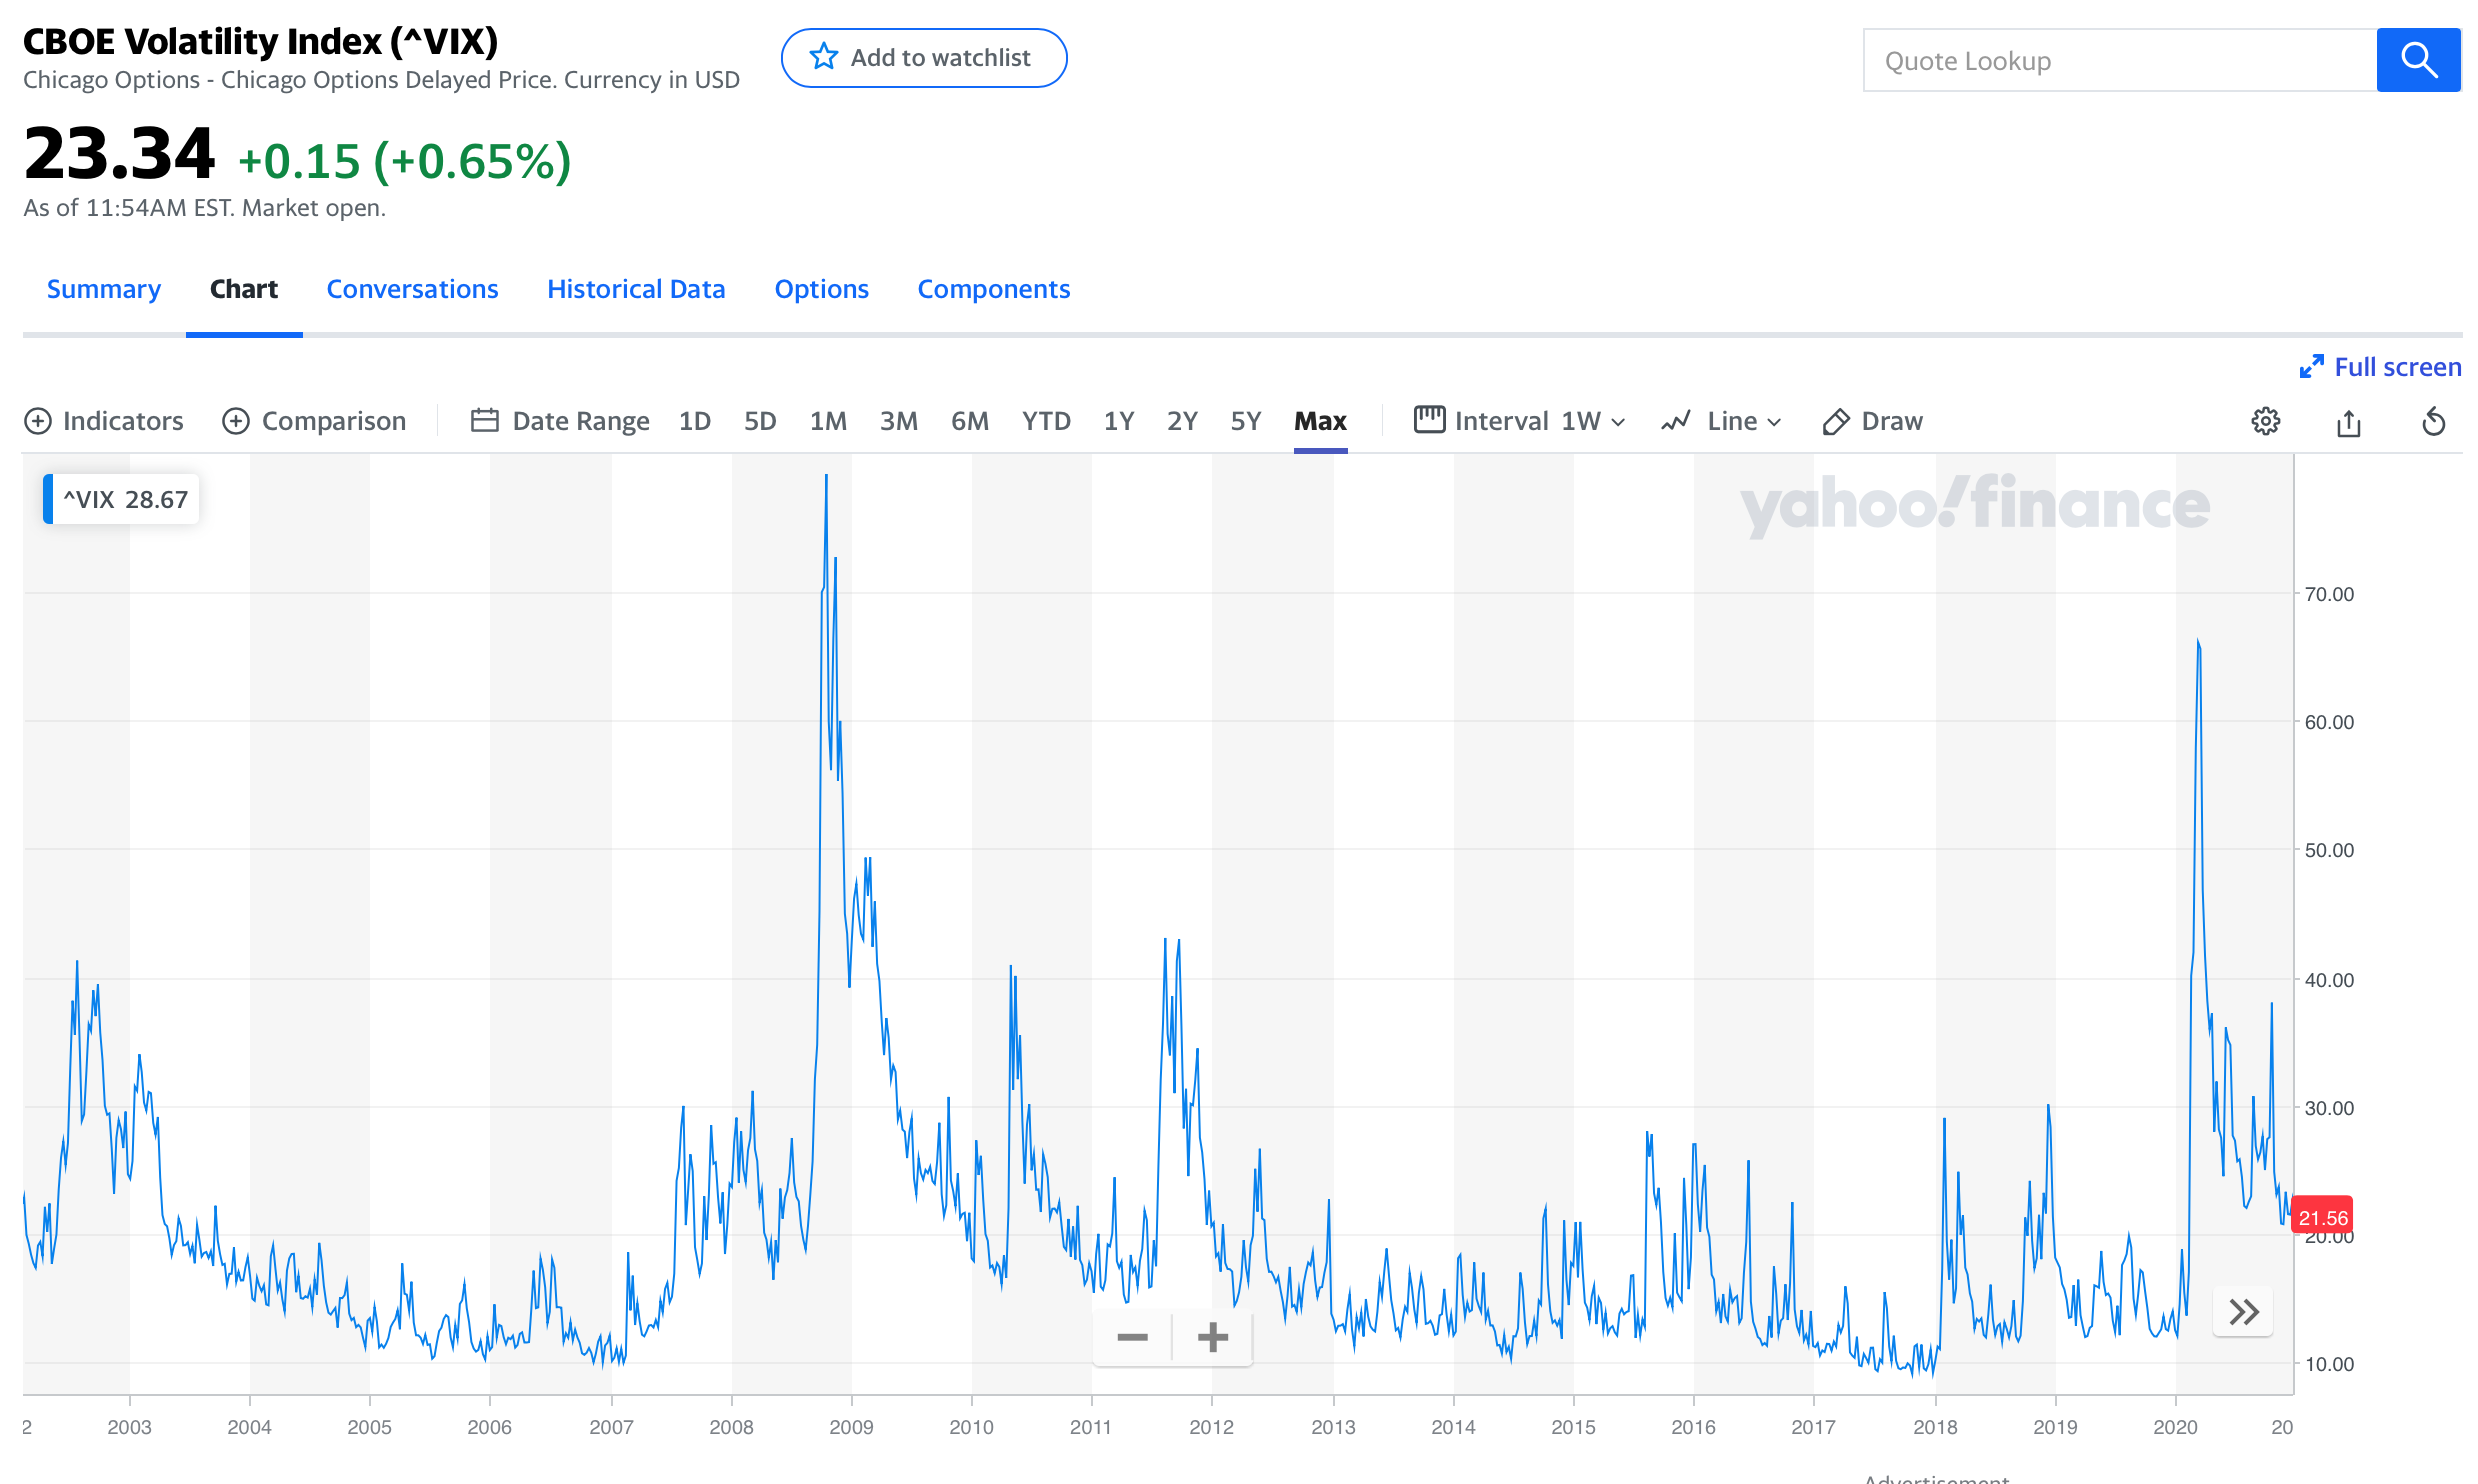 Implied volatility increases during bad times, like 2008 -- 2009 and 2020.